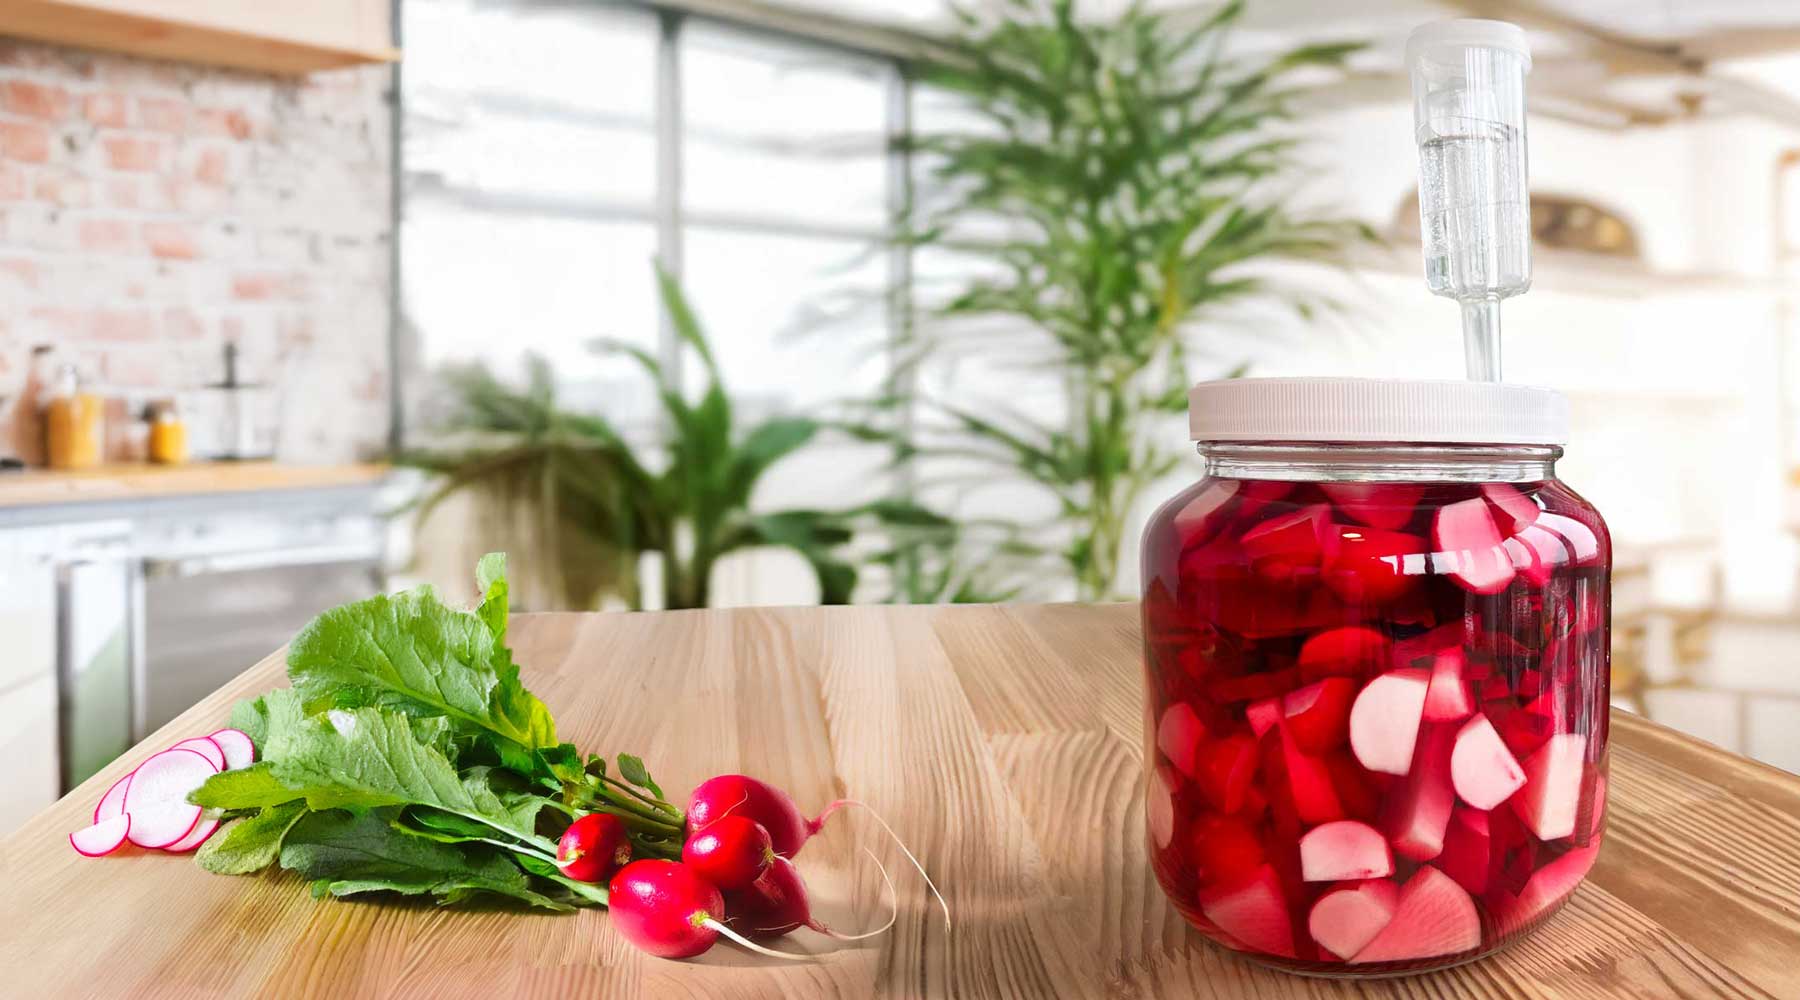 Radishes in a FarmSteady Fermented Vegetable Kit